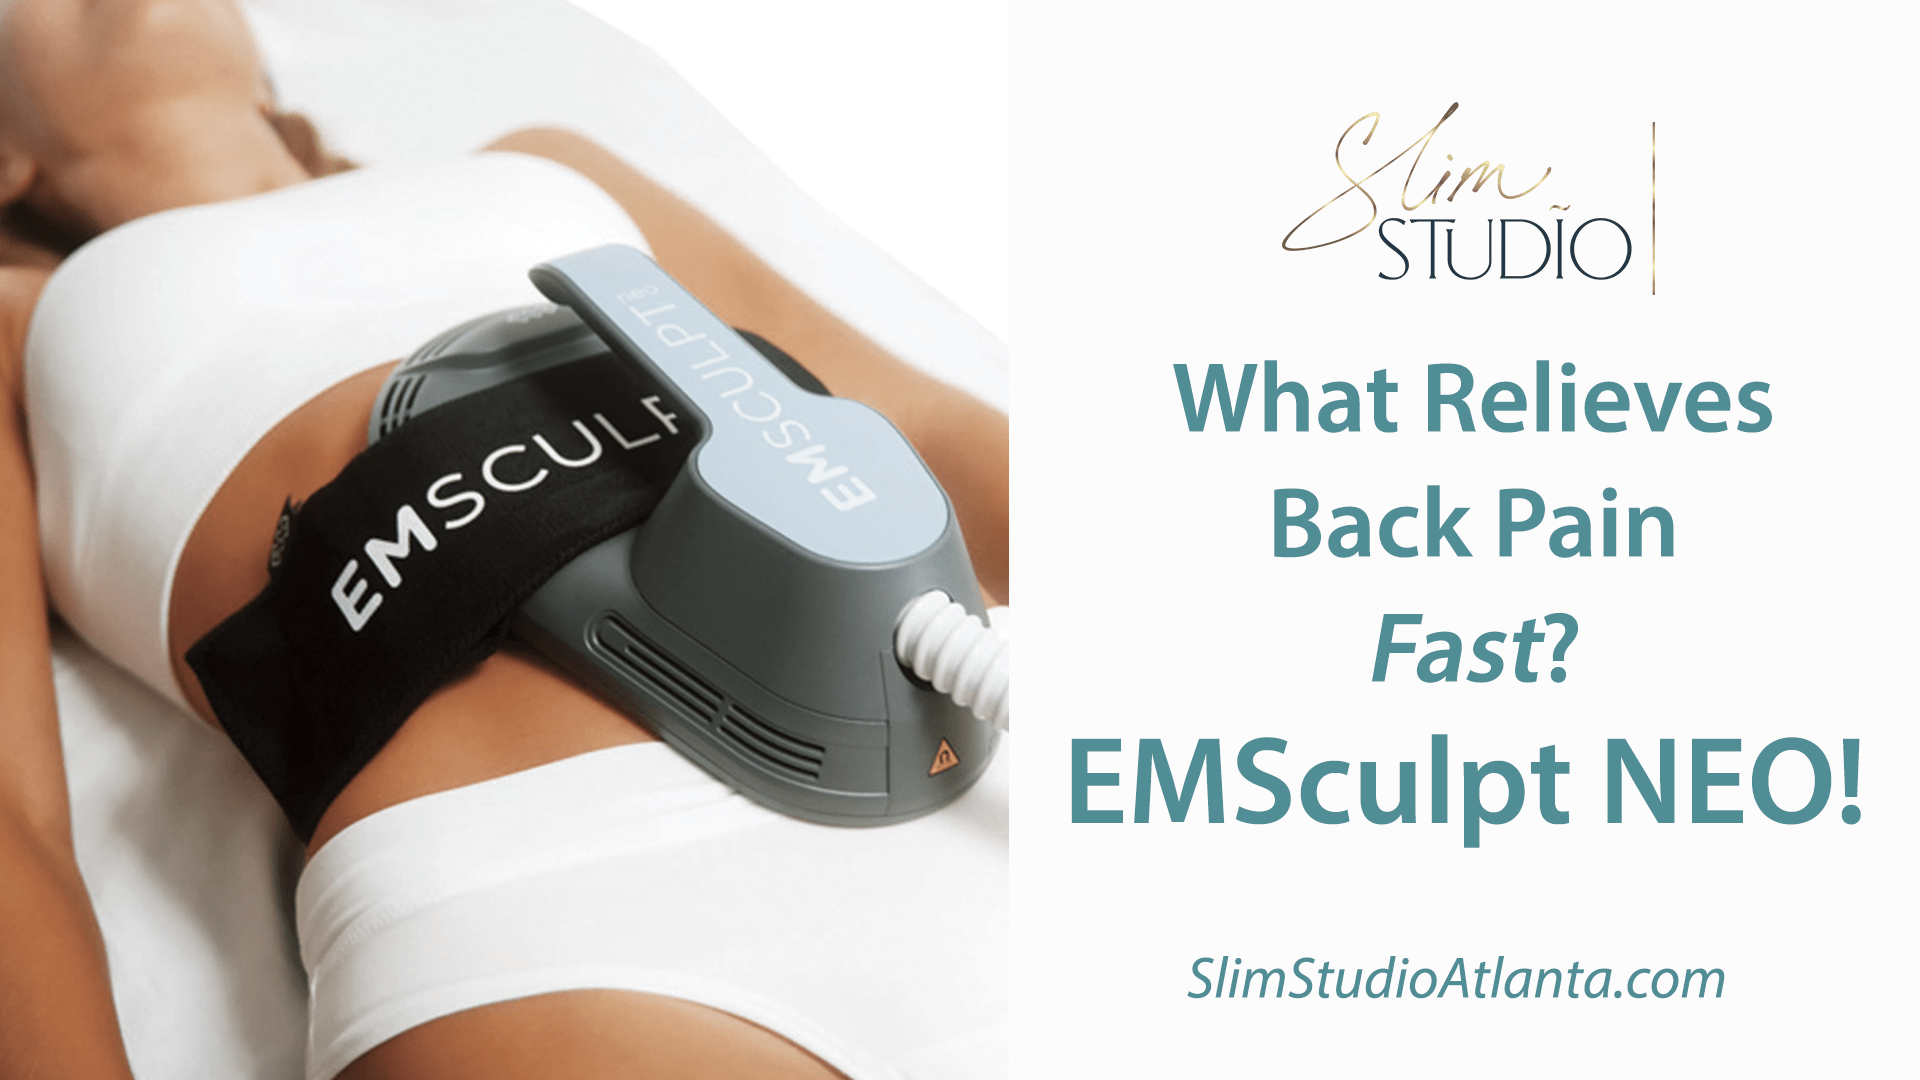 How to Heal Back Pain with EMSculpt NEO